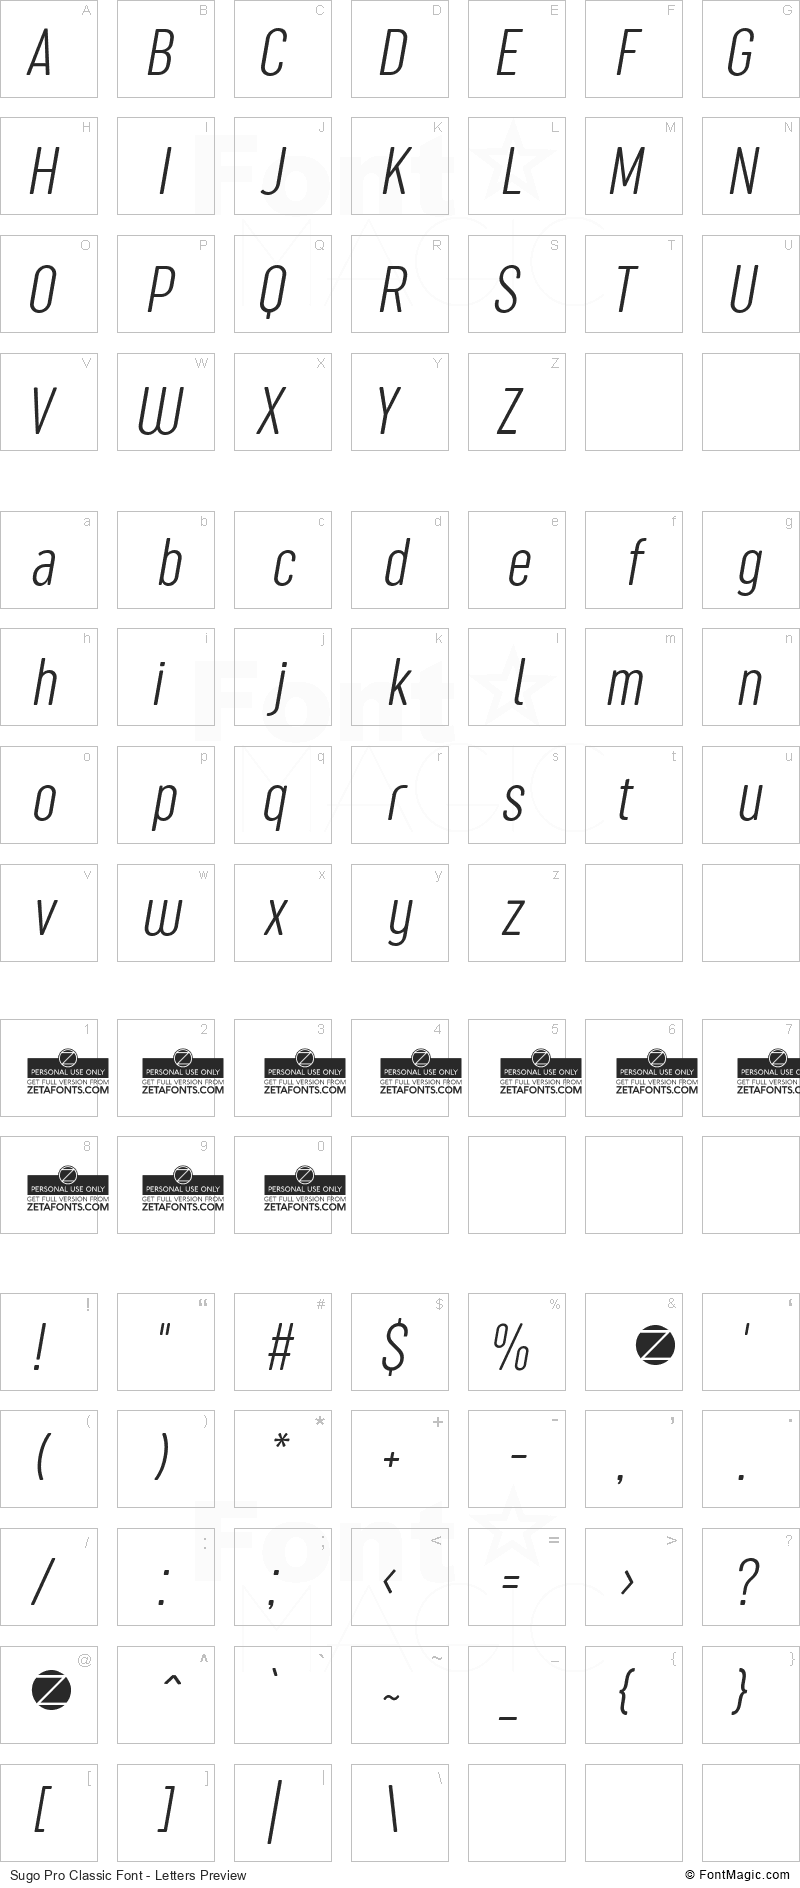 Sugo Pro Classic Font - All Latters Preview Chart